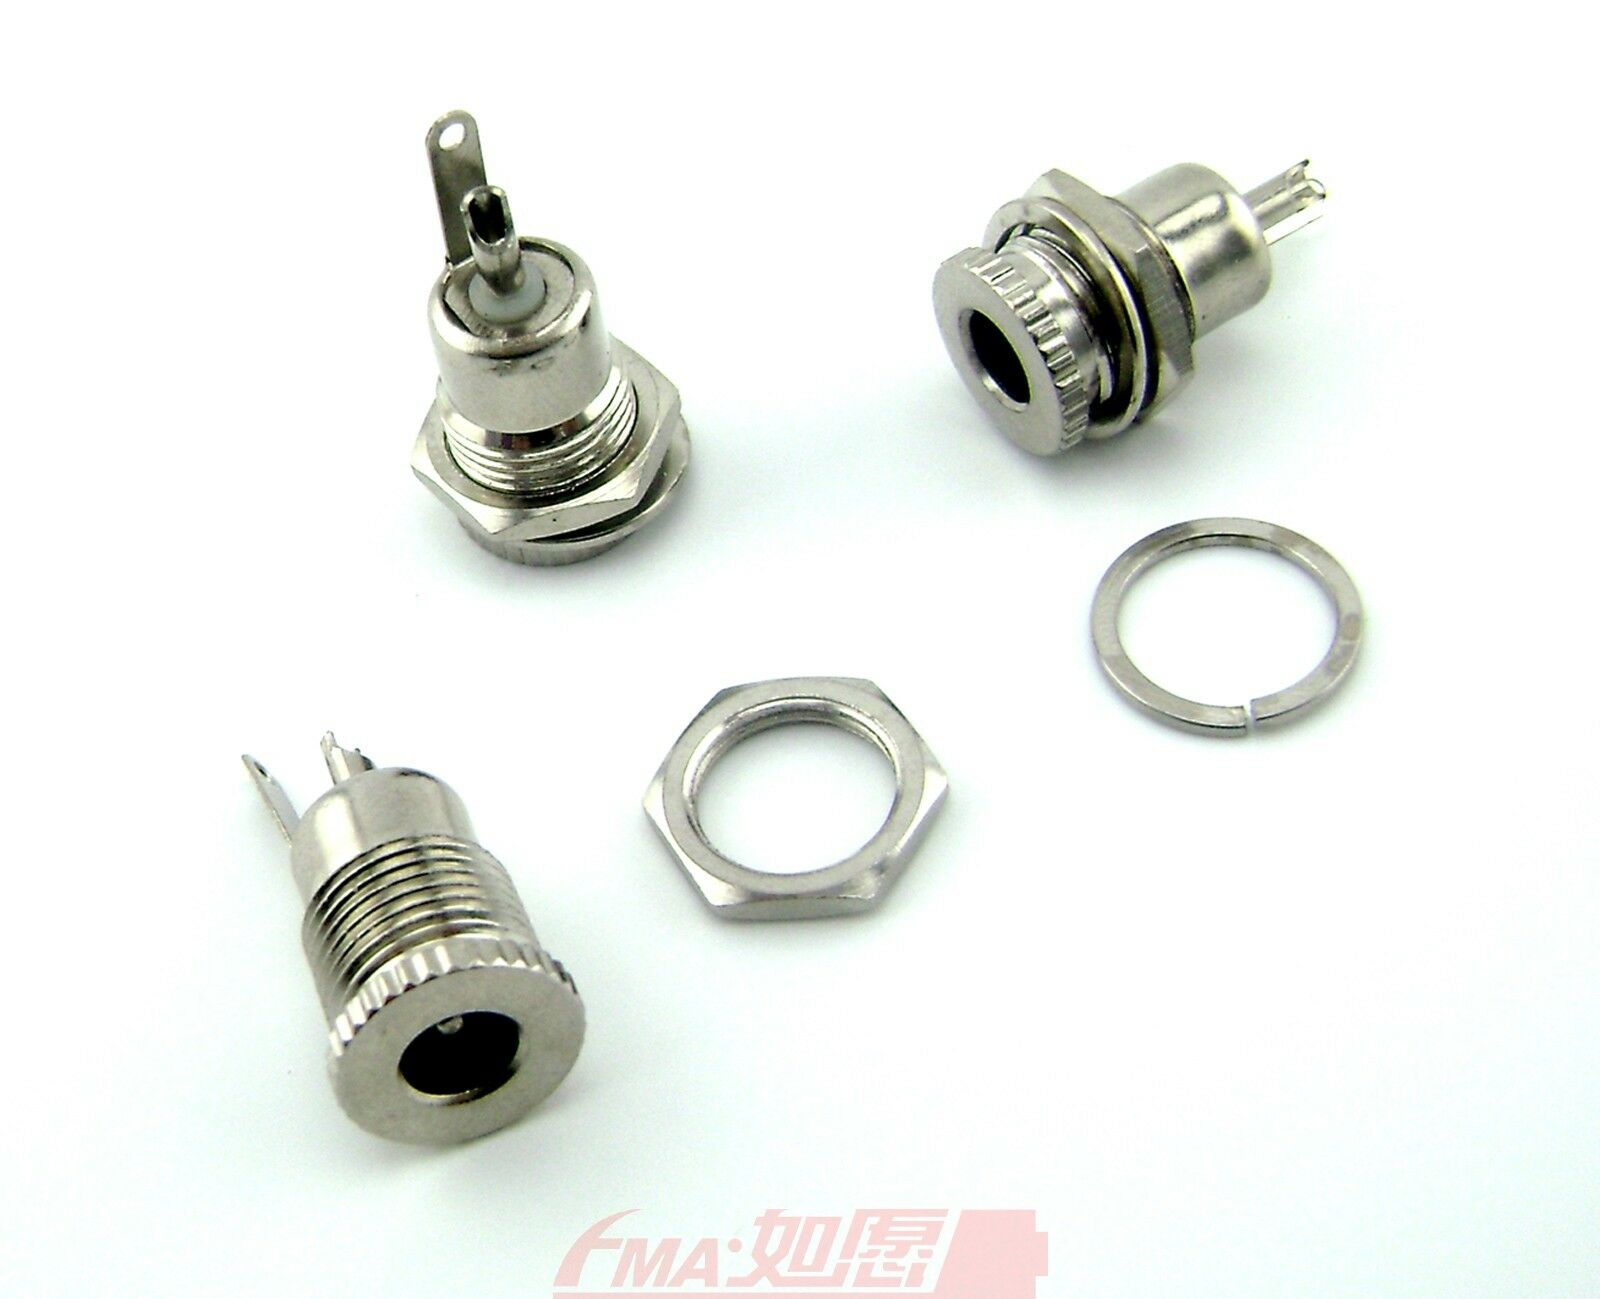 3sets of DC5.5/2.5mm Socket Connector for output connection full Metal Material